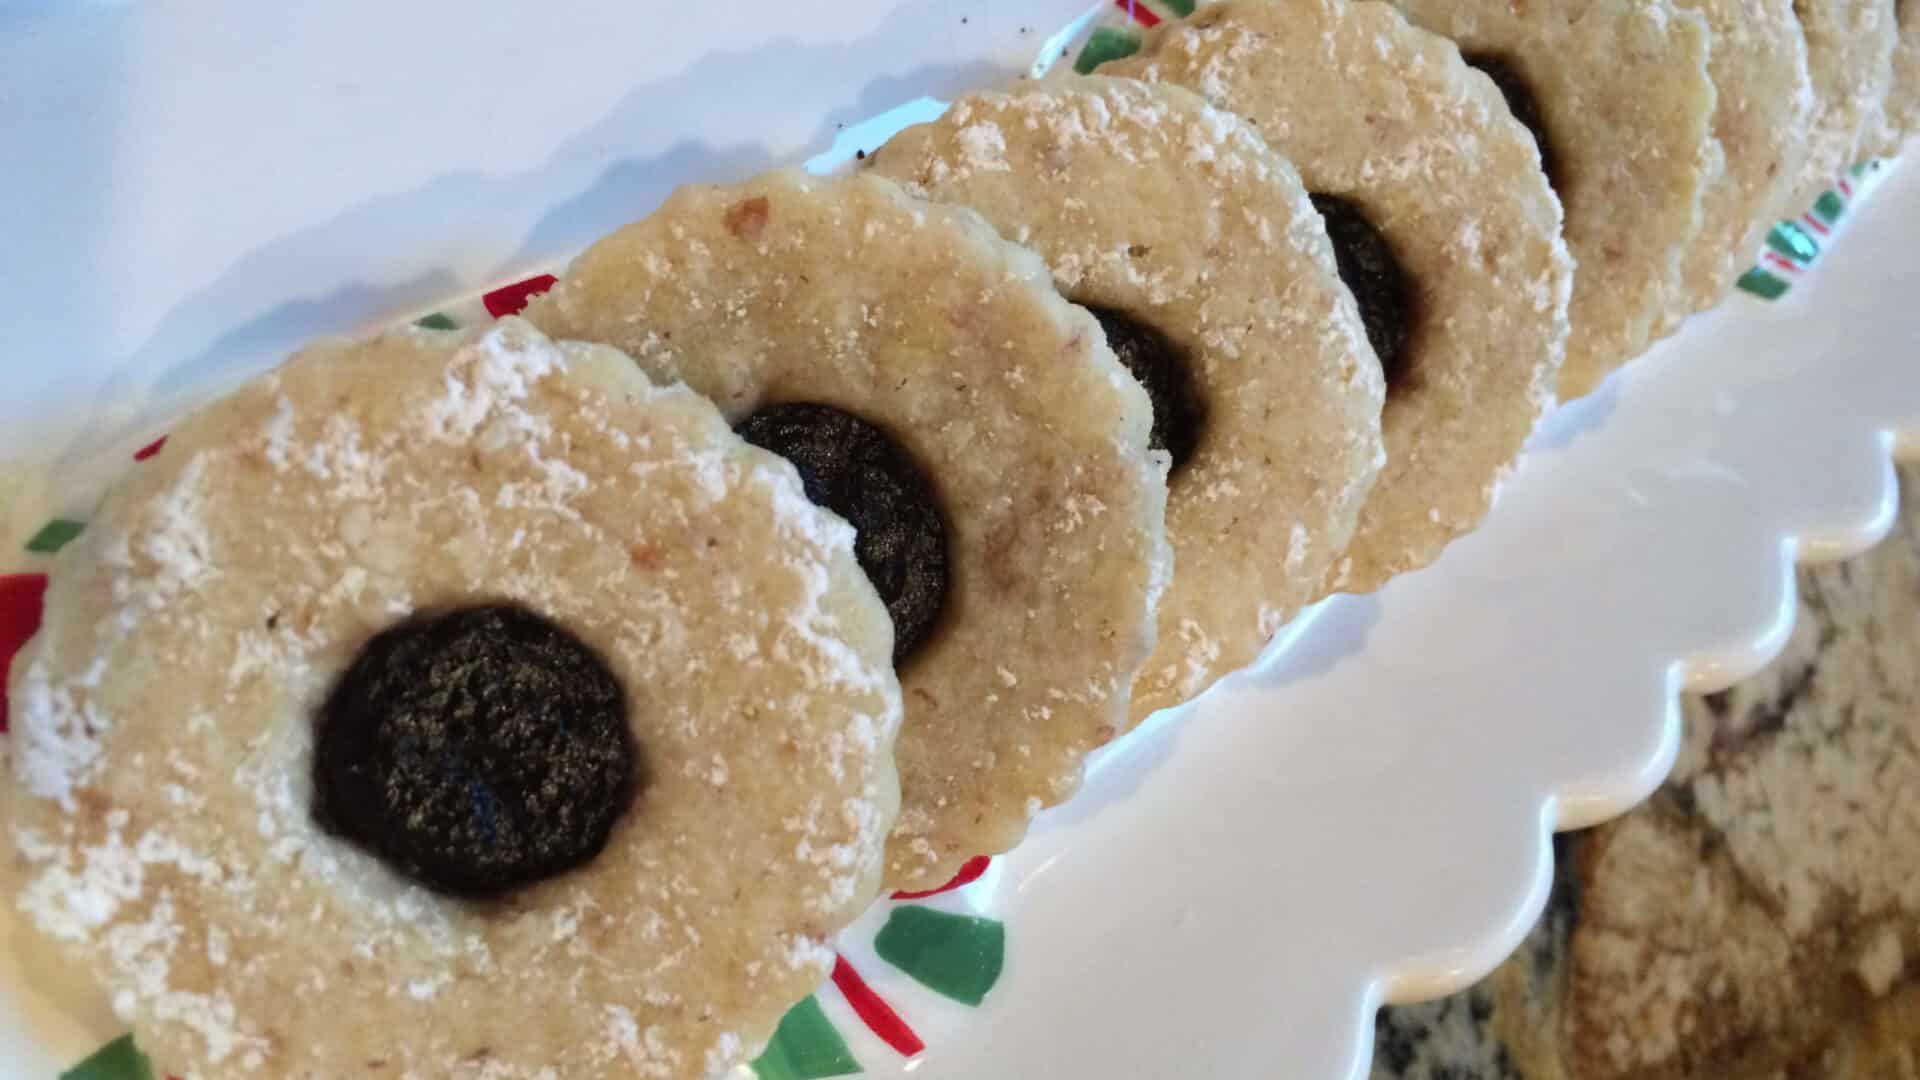 Round nutty cookies with cut out in the middle filled with a reddish purple jam, sprinkled with powdered sugar